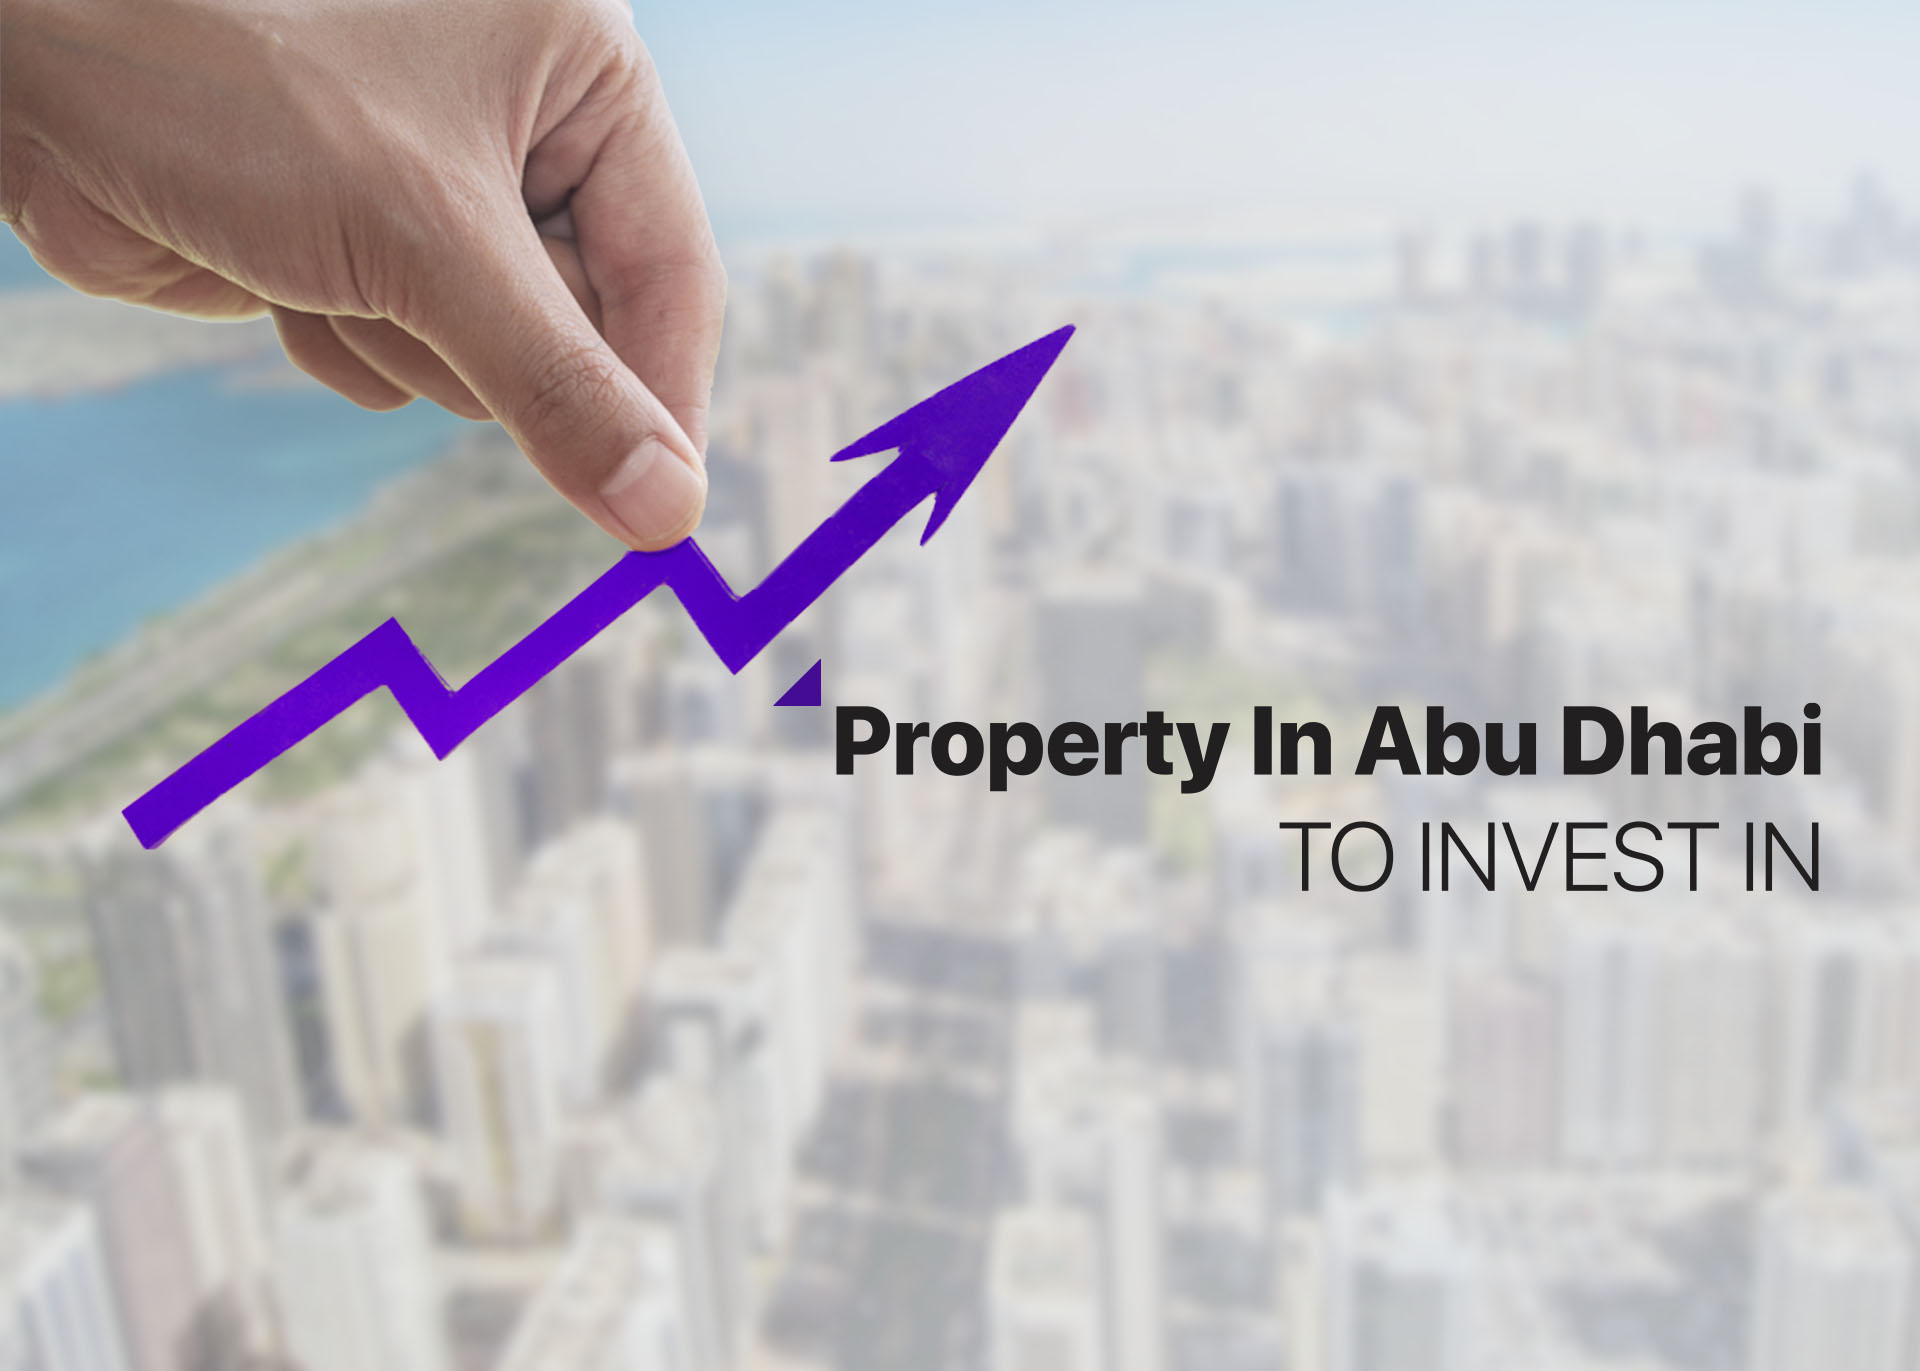 Property In Abu Dhabi To Invest In- Blog Post Image - FCP.jpg